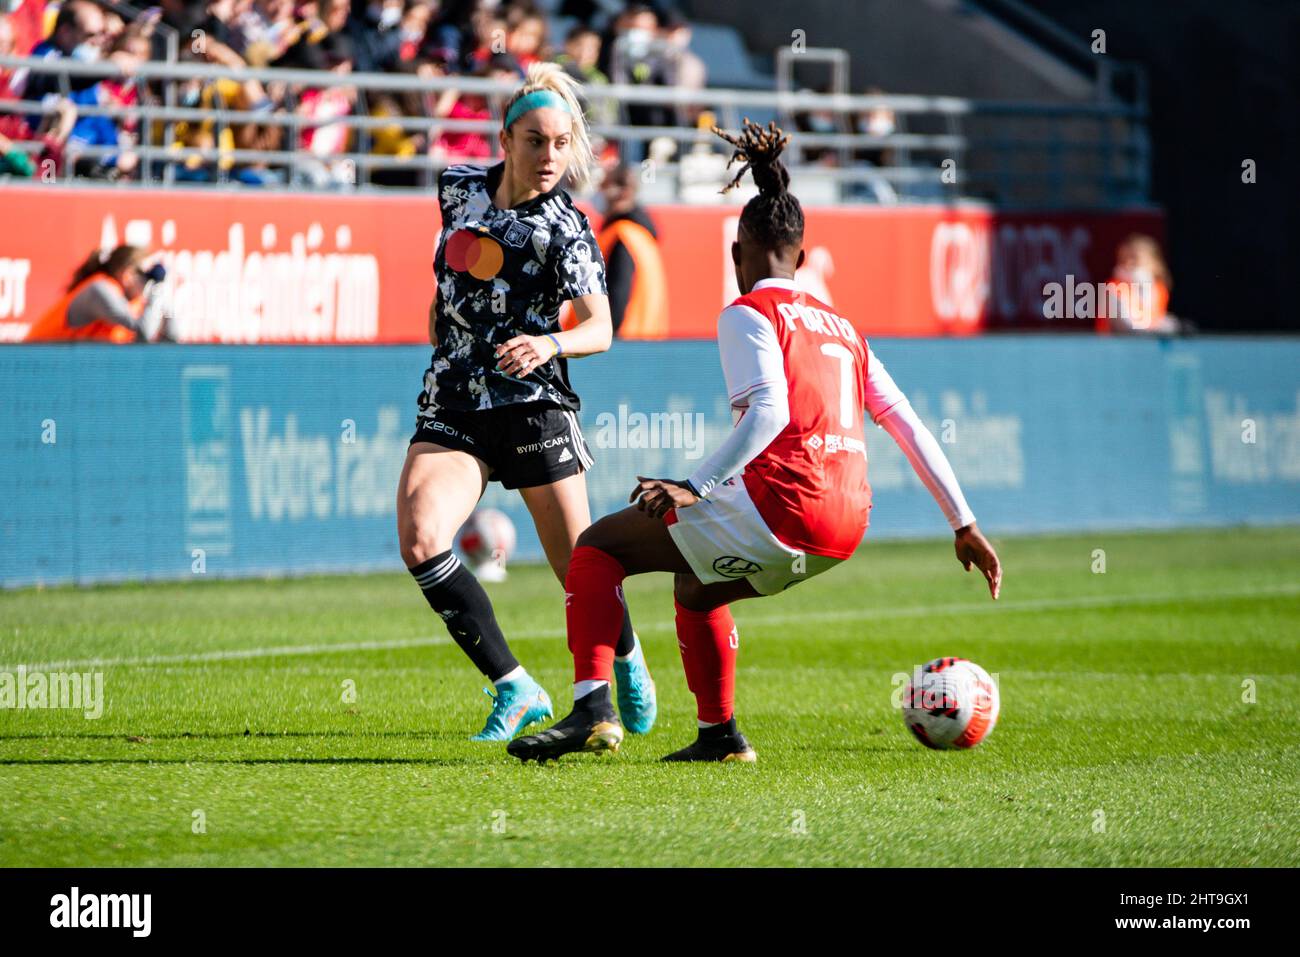 Ellie Carpenter of Olympique Lyonnais and Miracle Porter of Stade de Reims  fight for the ball during the Women's French championship, D1 Arkema  football match between Stade de Reims and Olympique Lyonnais (